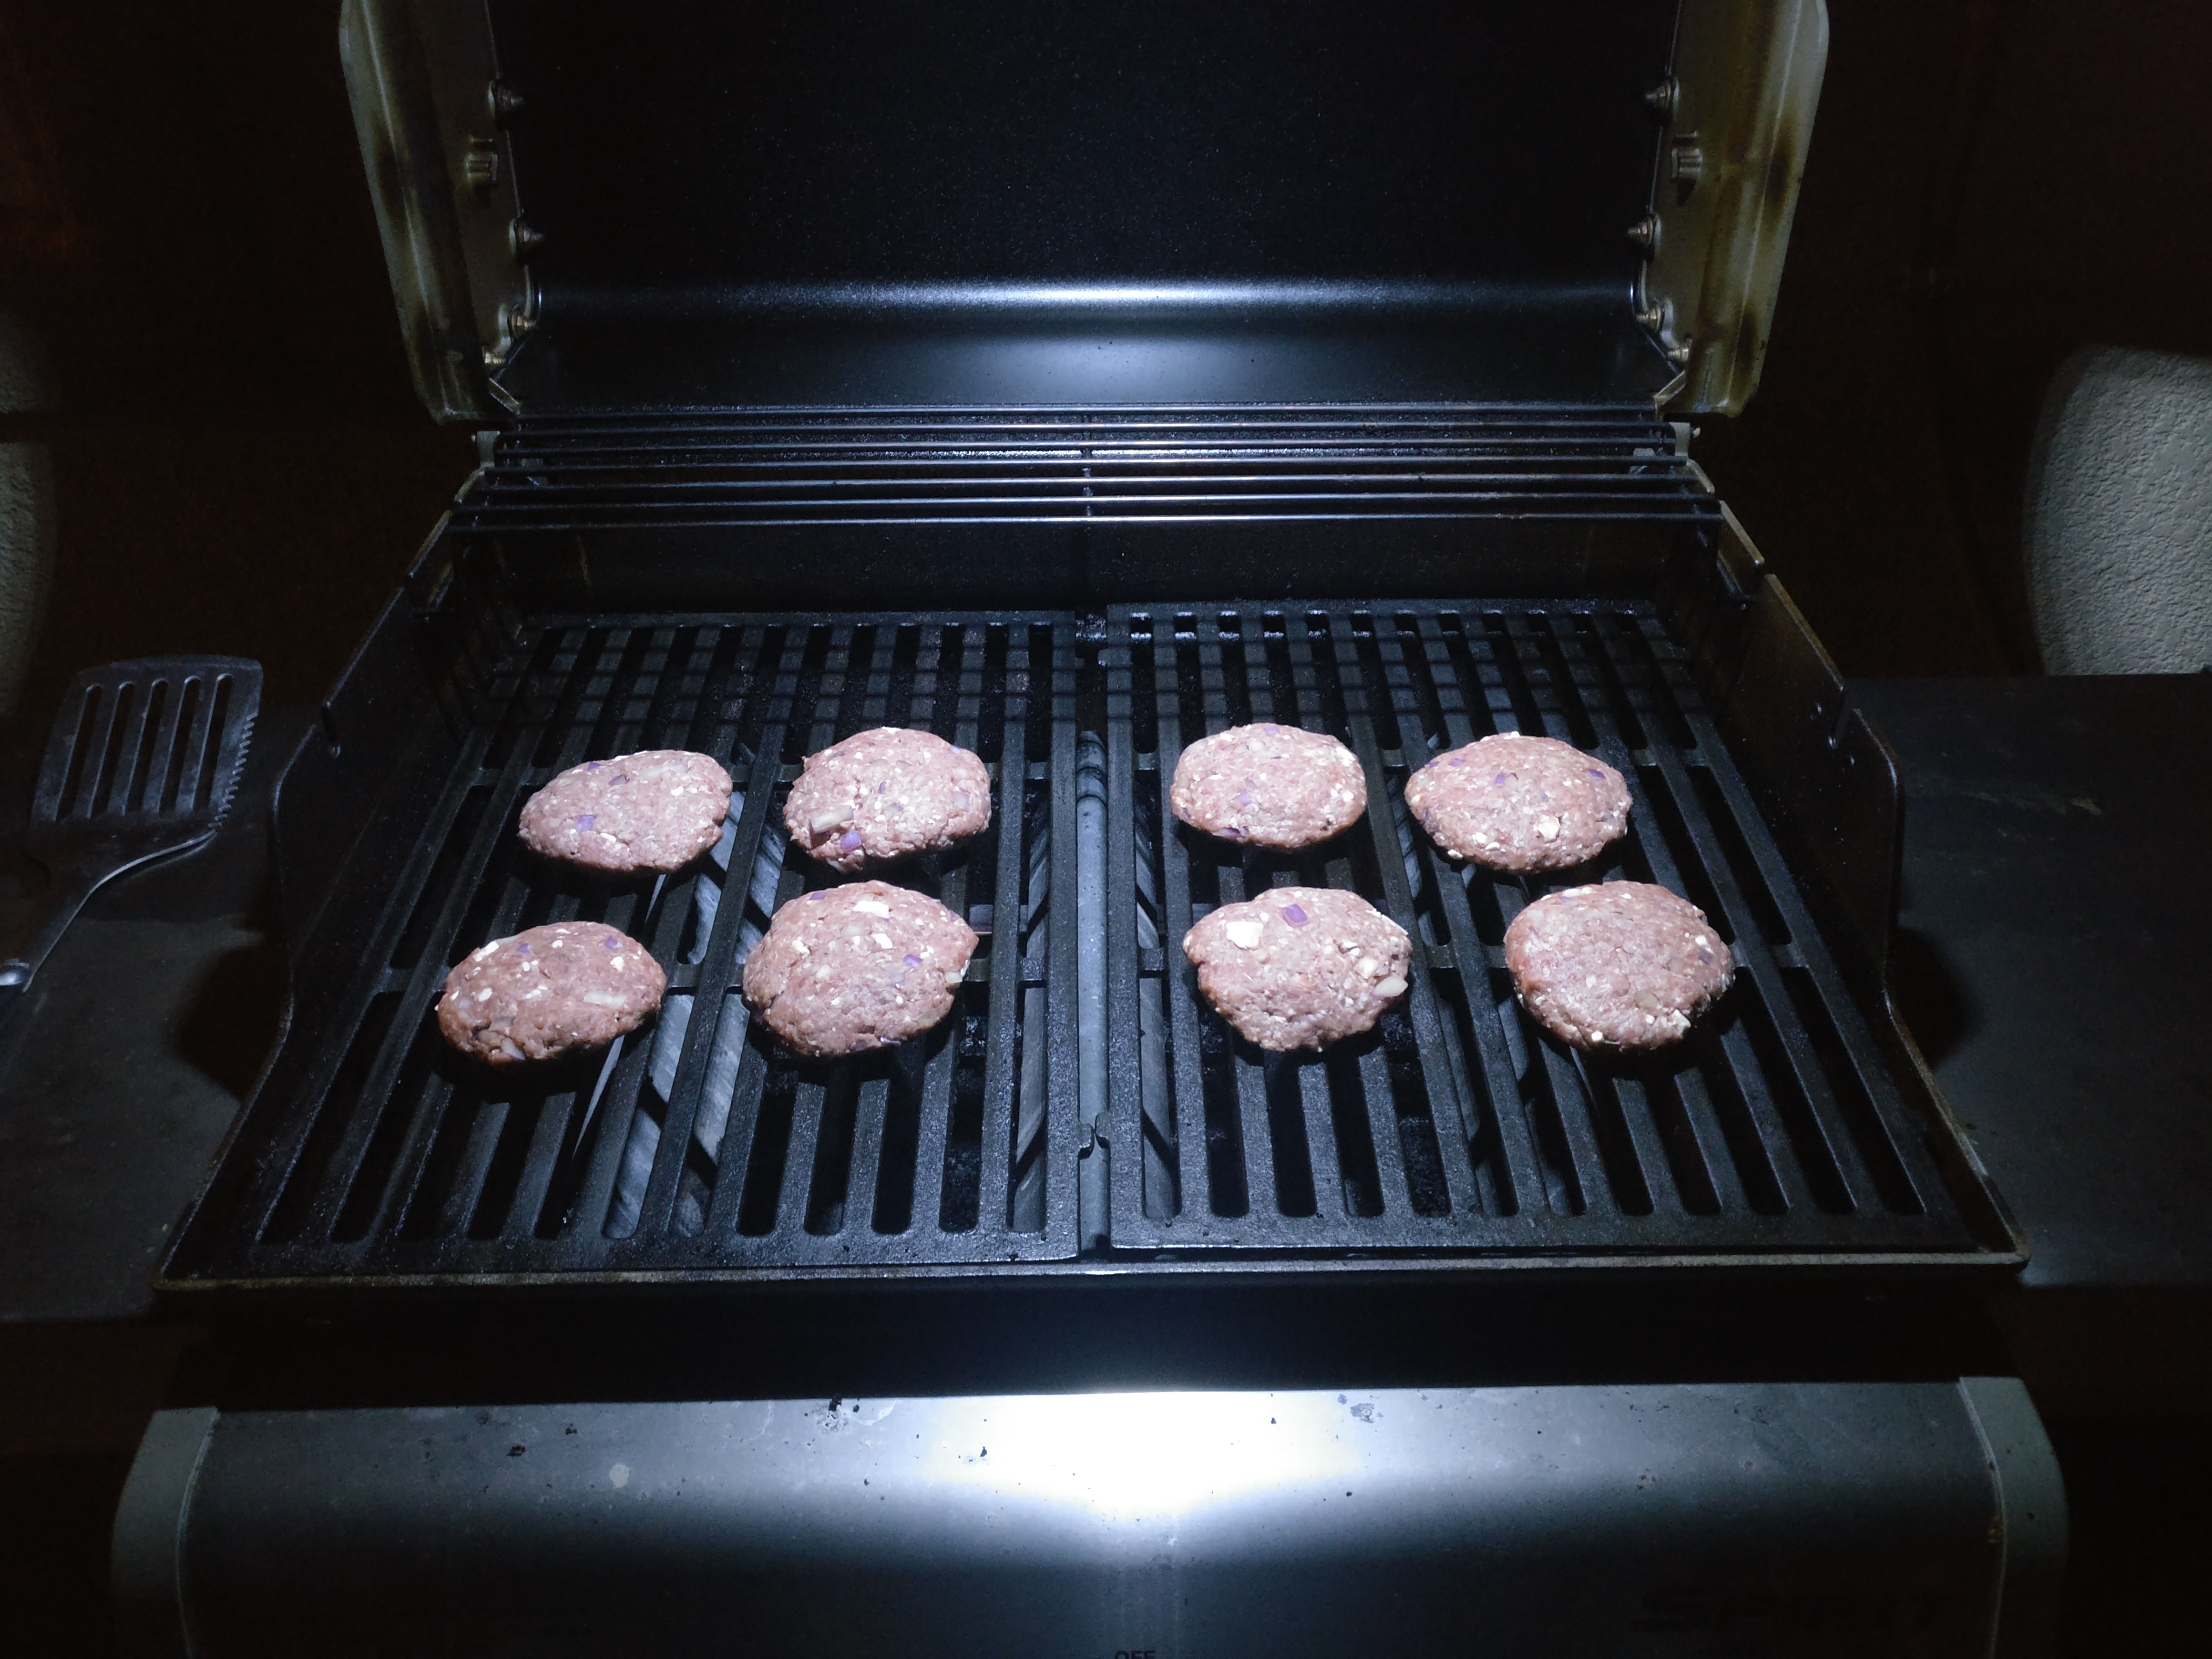 Greek Style Burgers on the Grill
